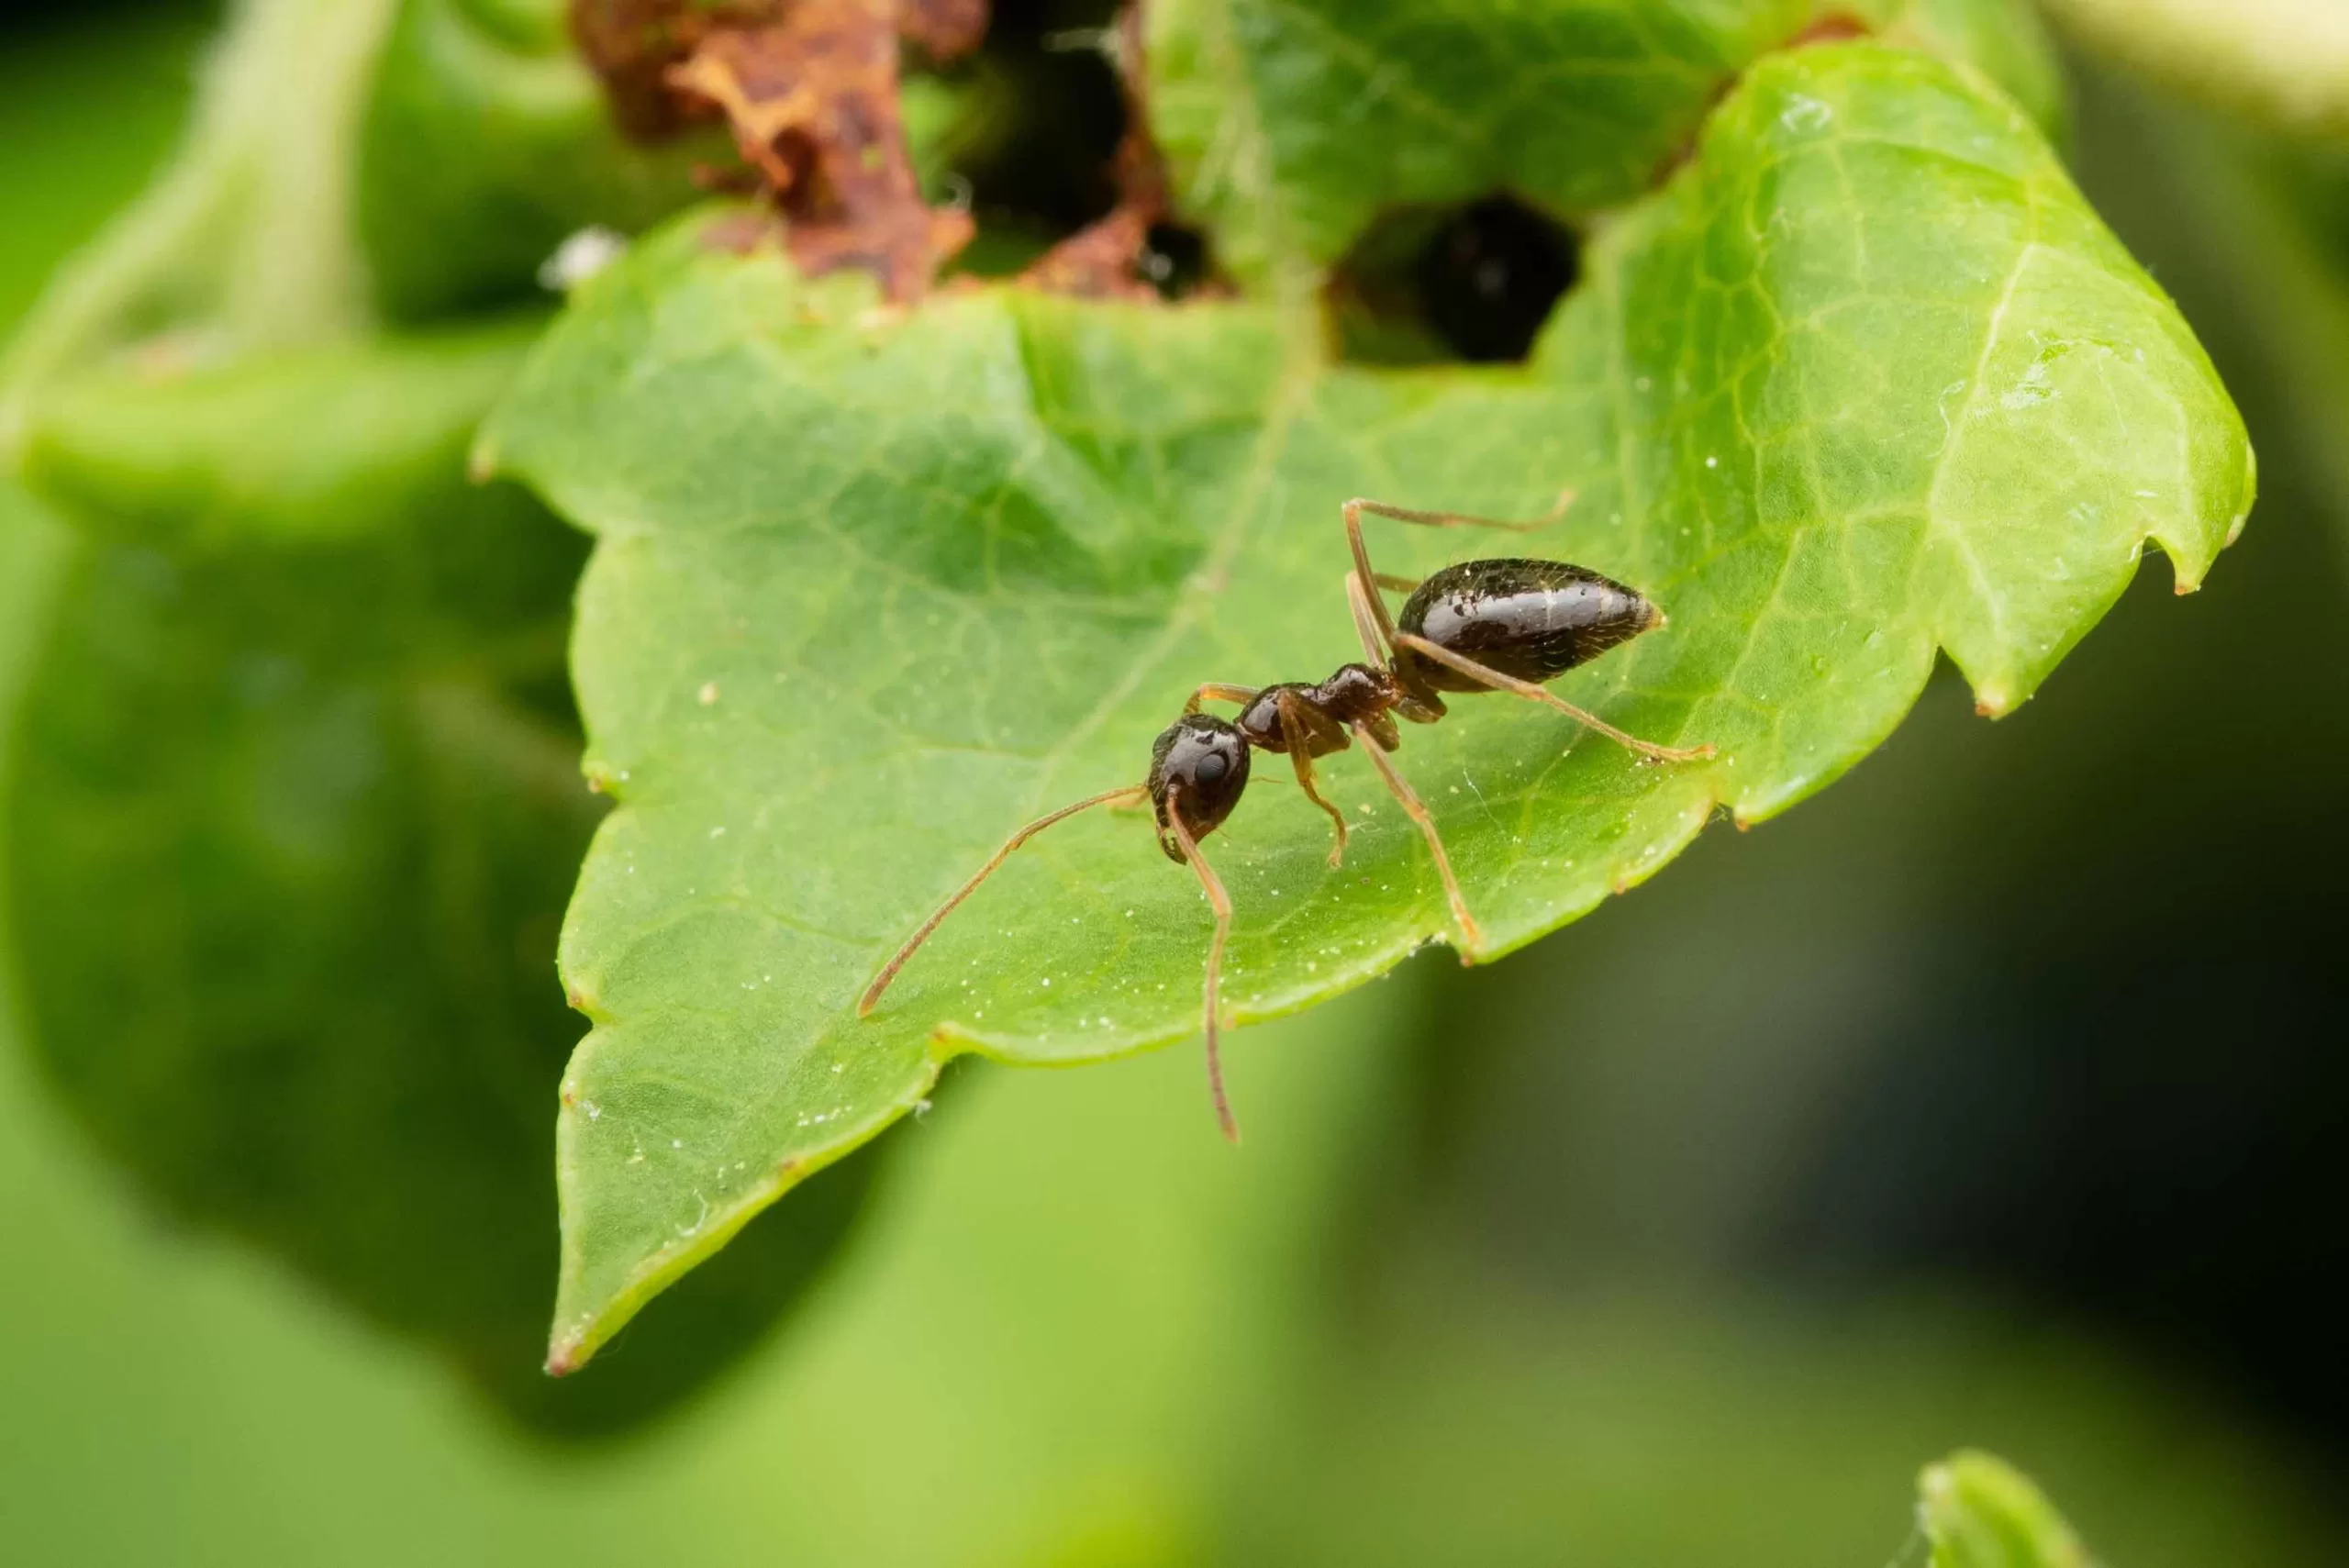 A Prenolepis imparis worker forages for food on a leaf.